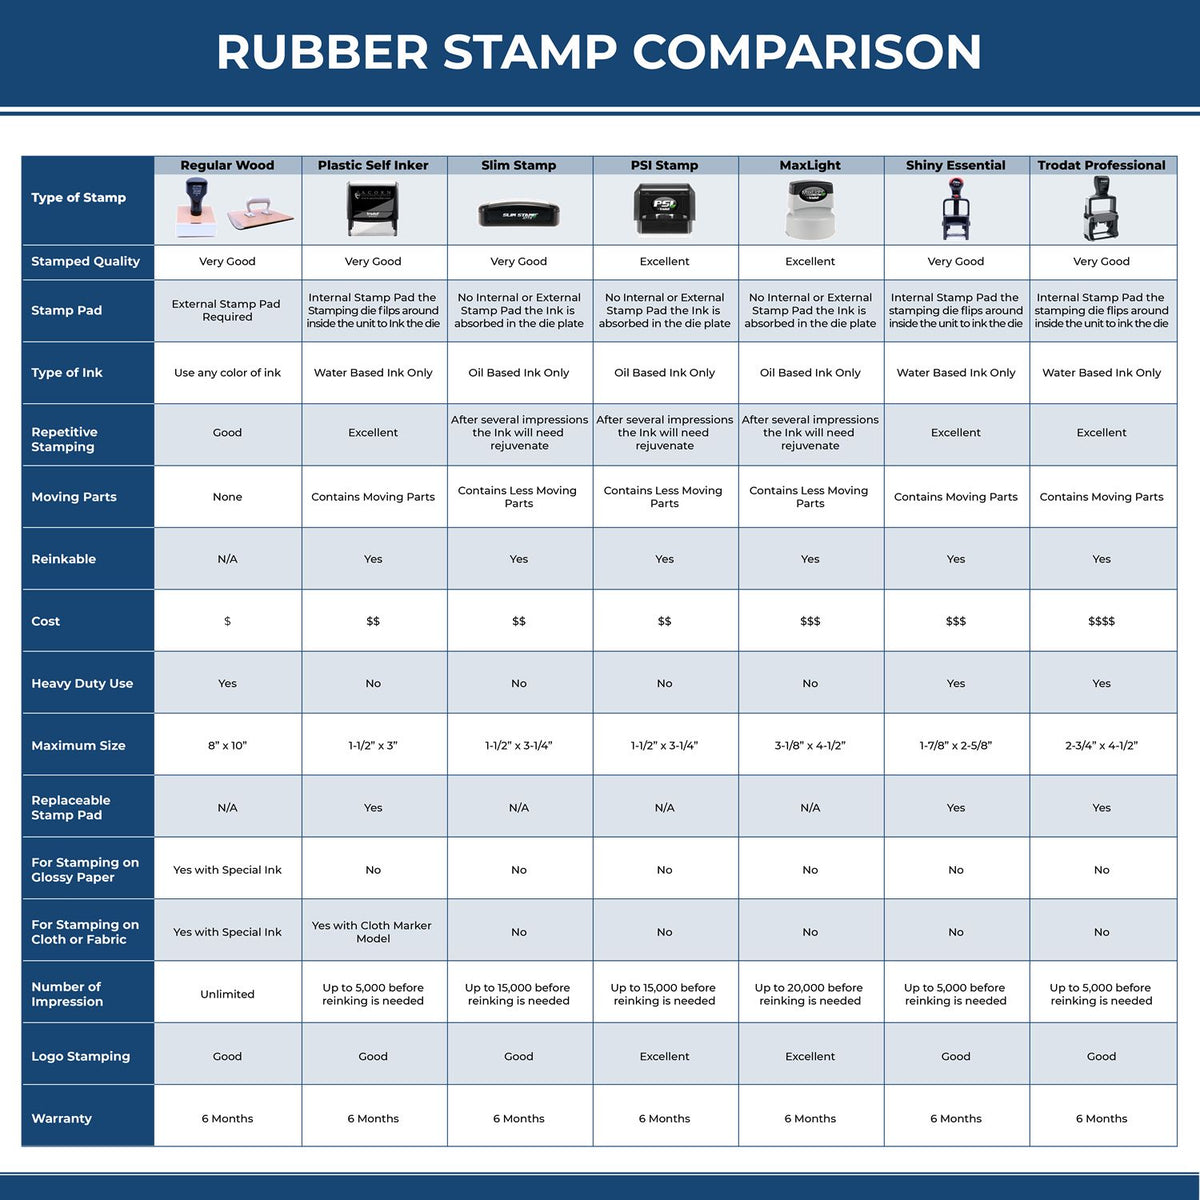 A comparison chart for the different types of mount models available for the Premium MaxLight Pre-Inked Iowa Landscape Architectural Stamp.